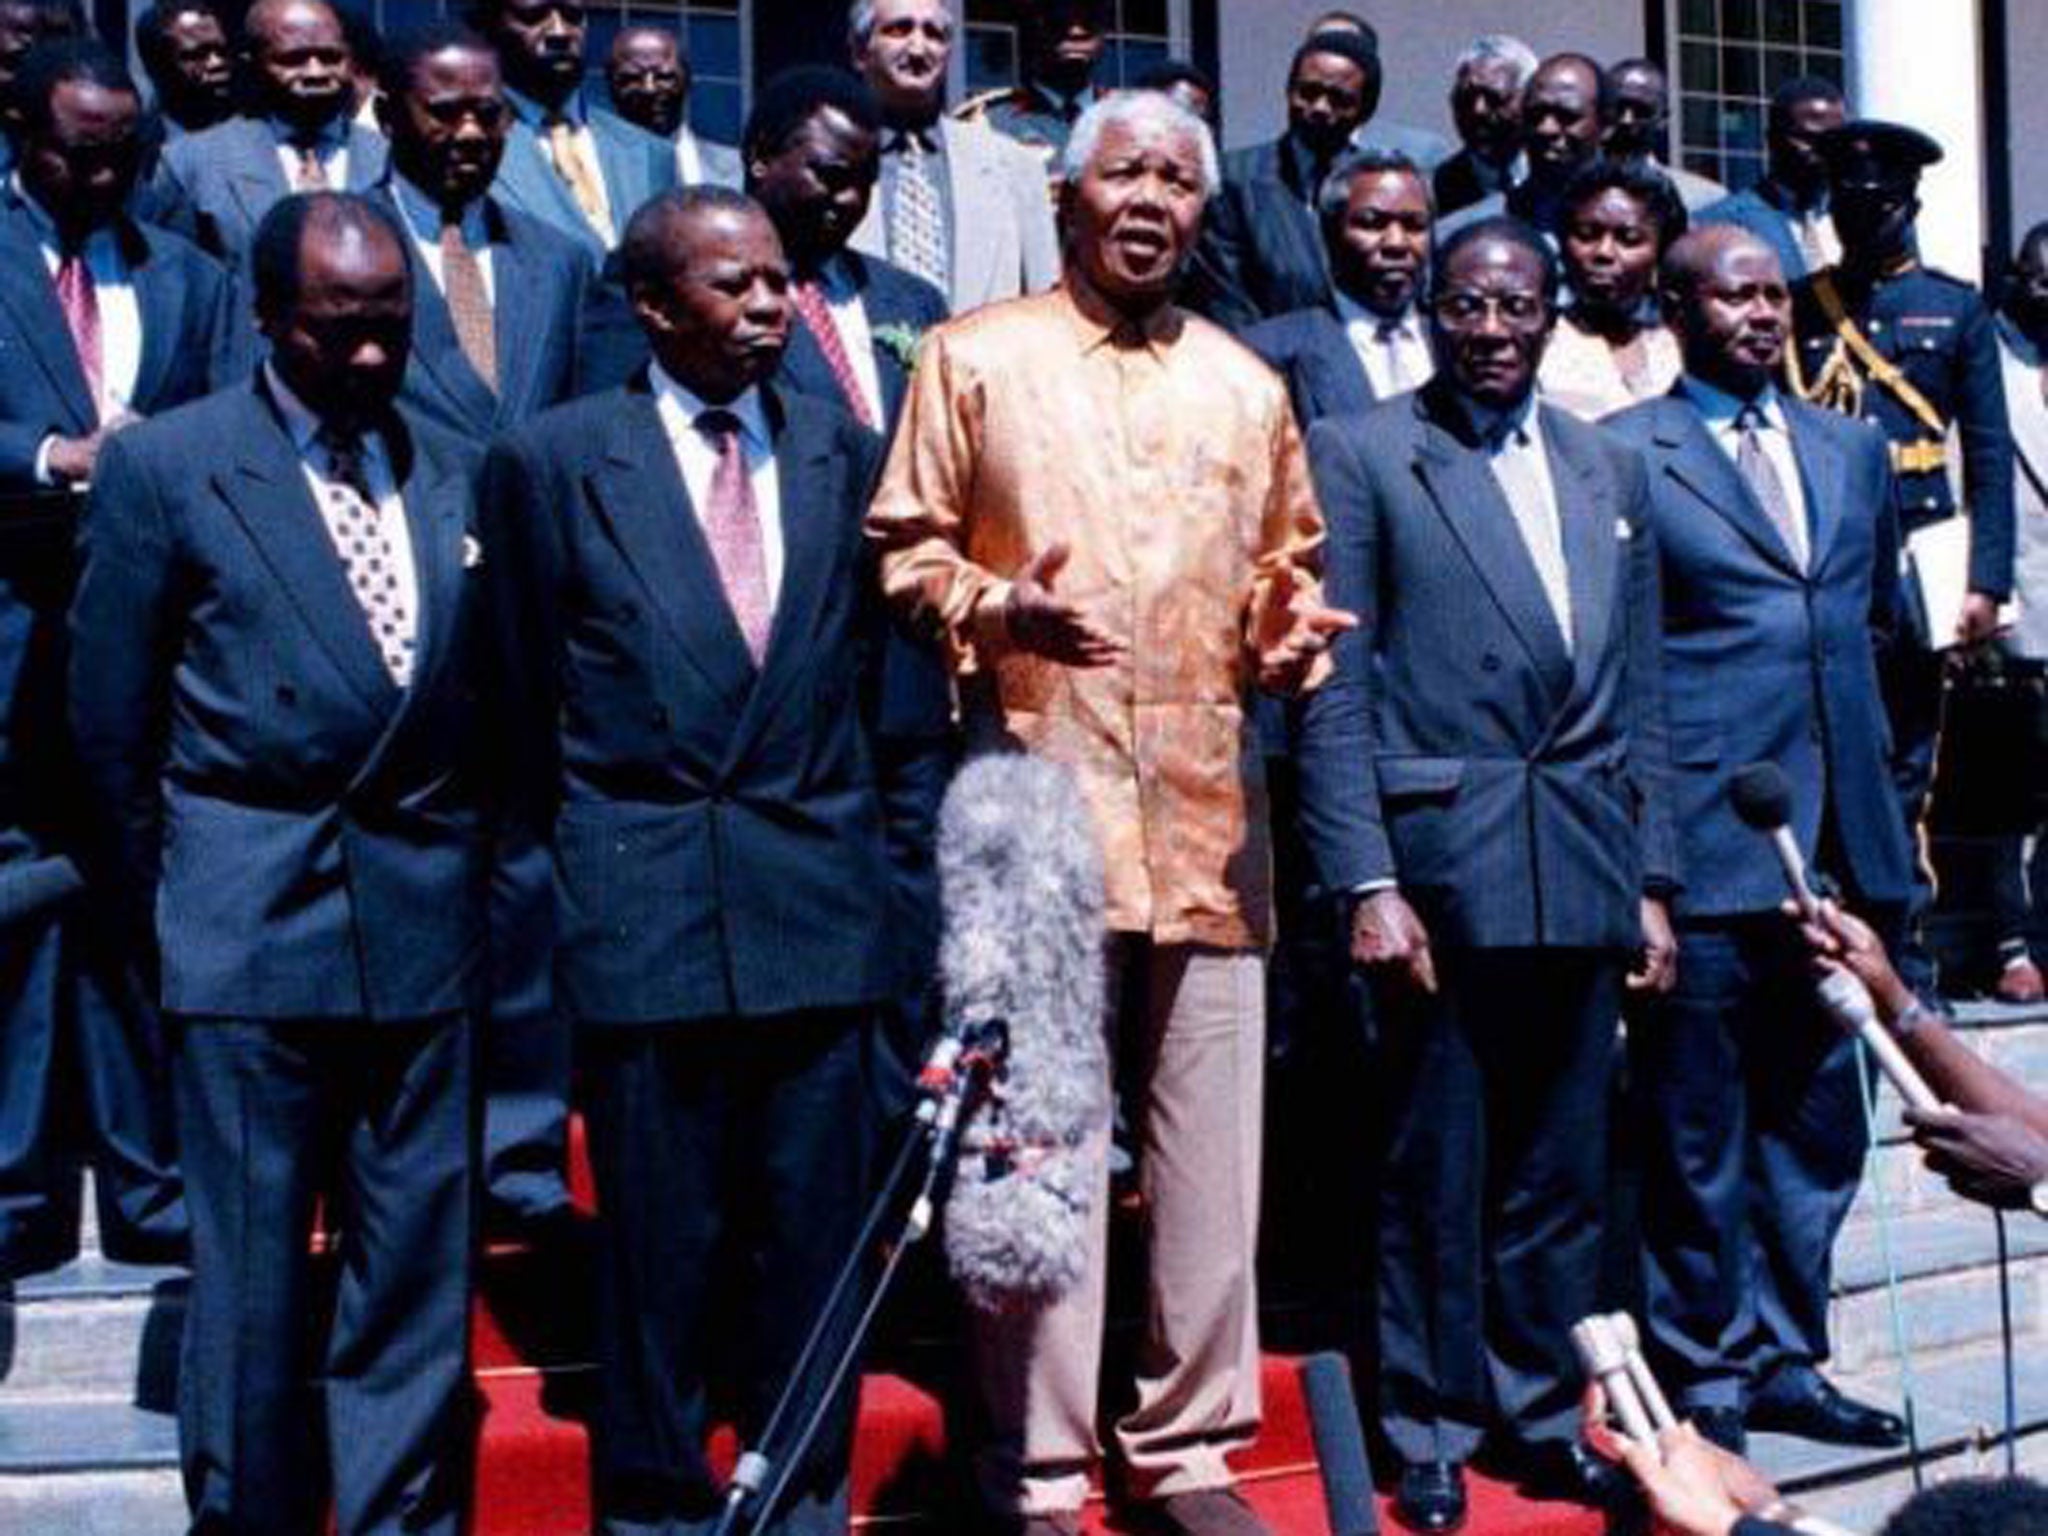 A meeting of African heads of state, Cape Town, 1997, with President Mugabe on his left